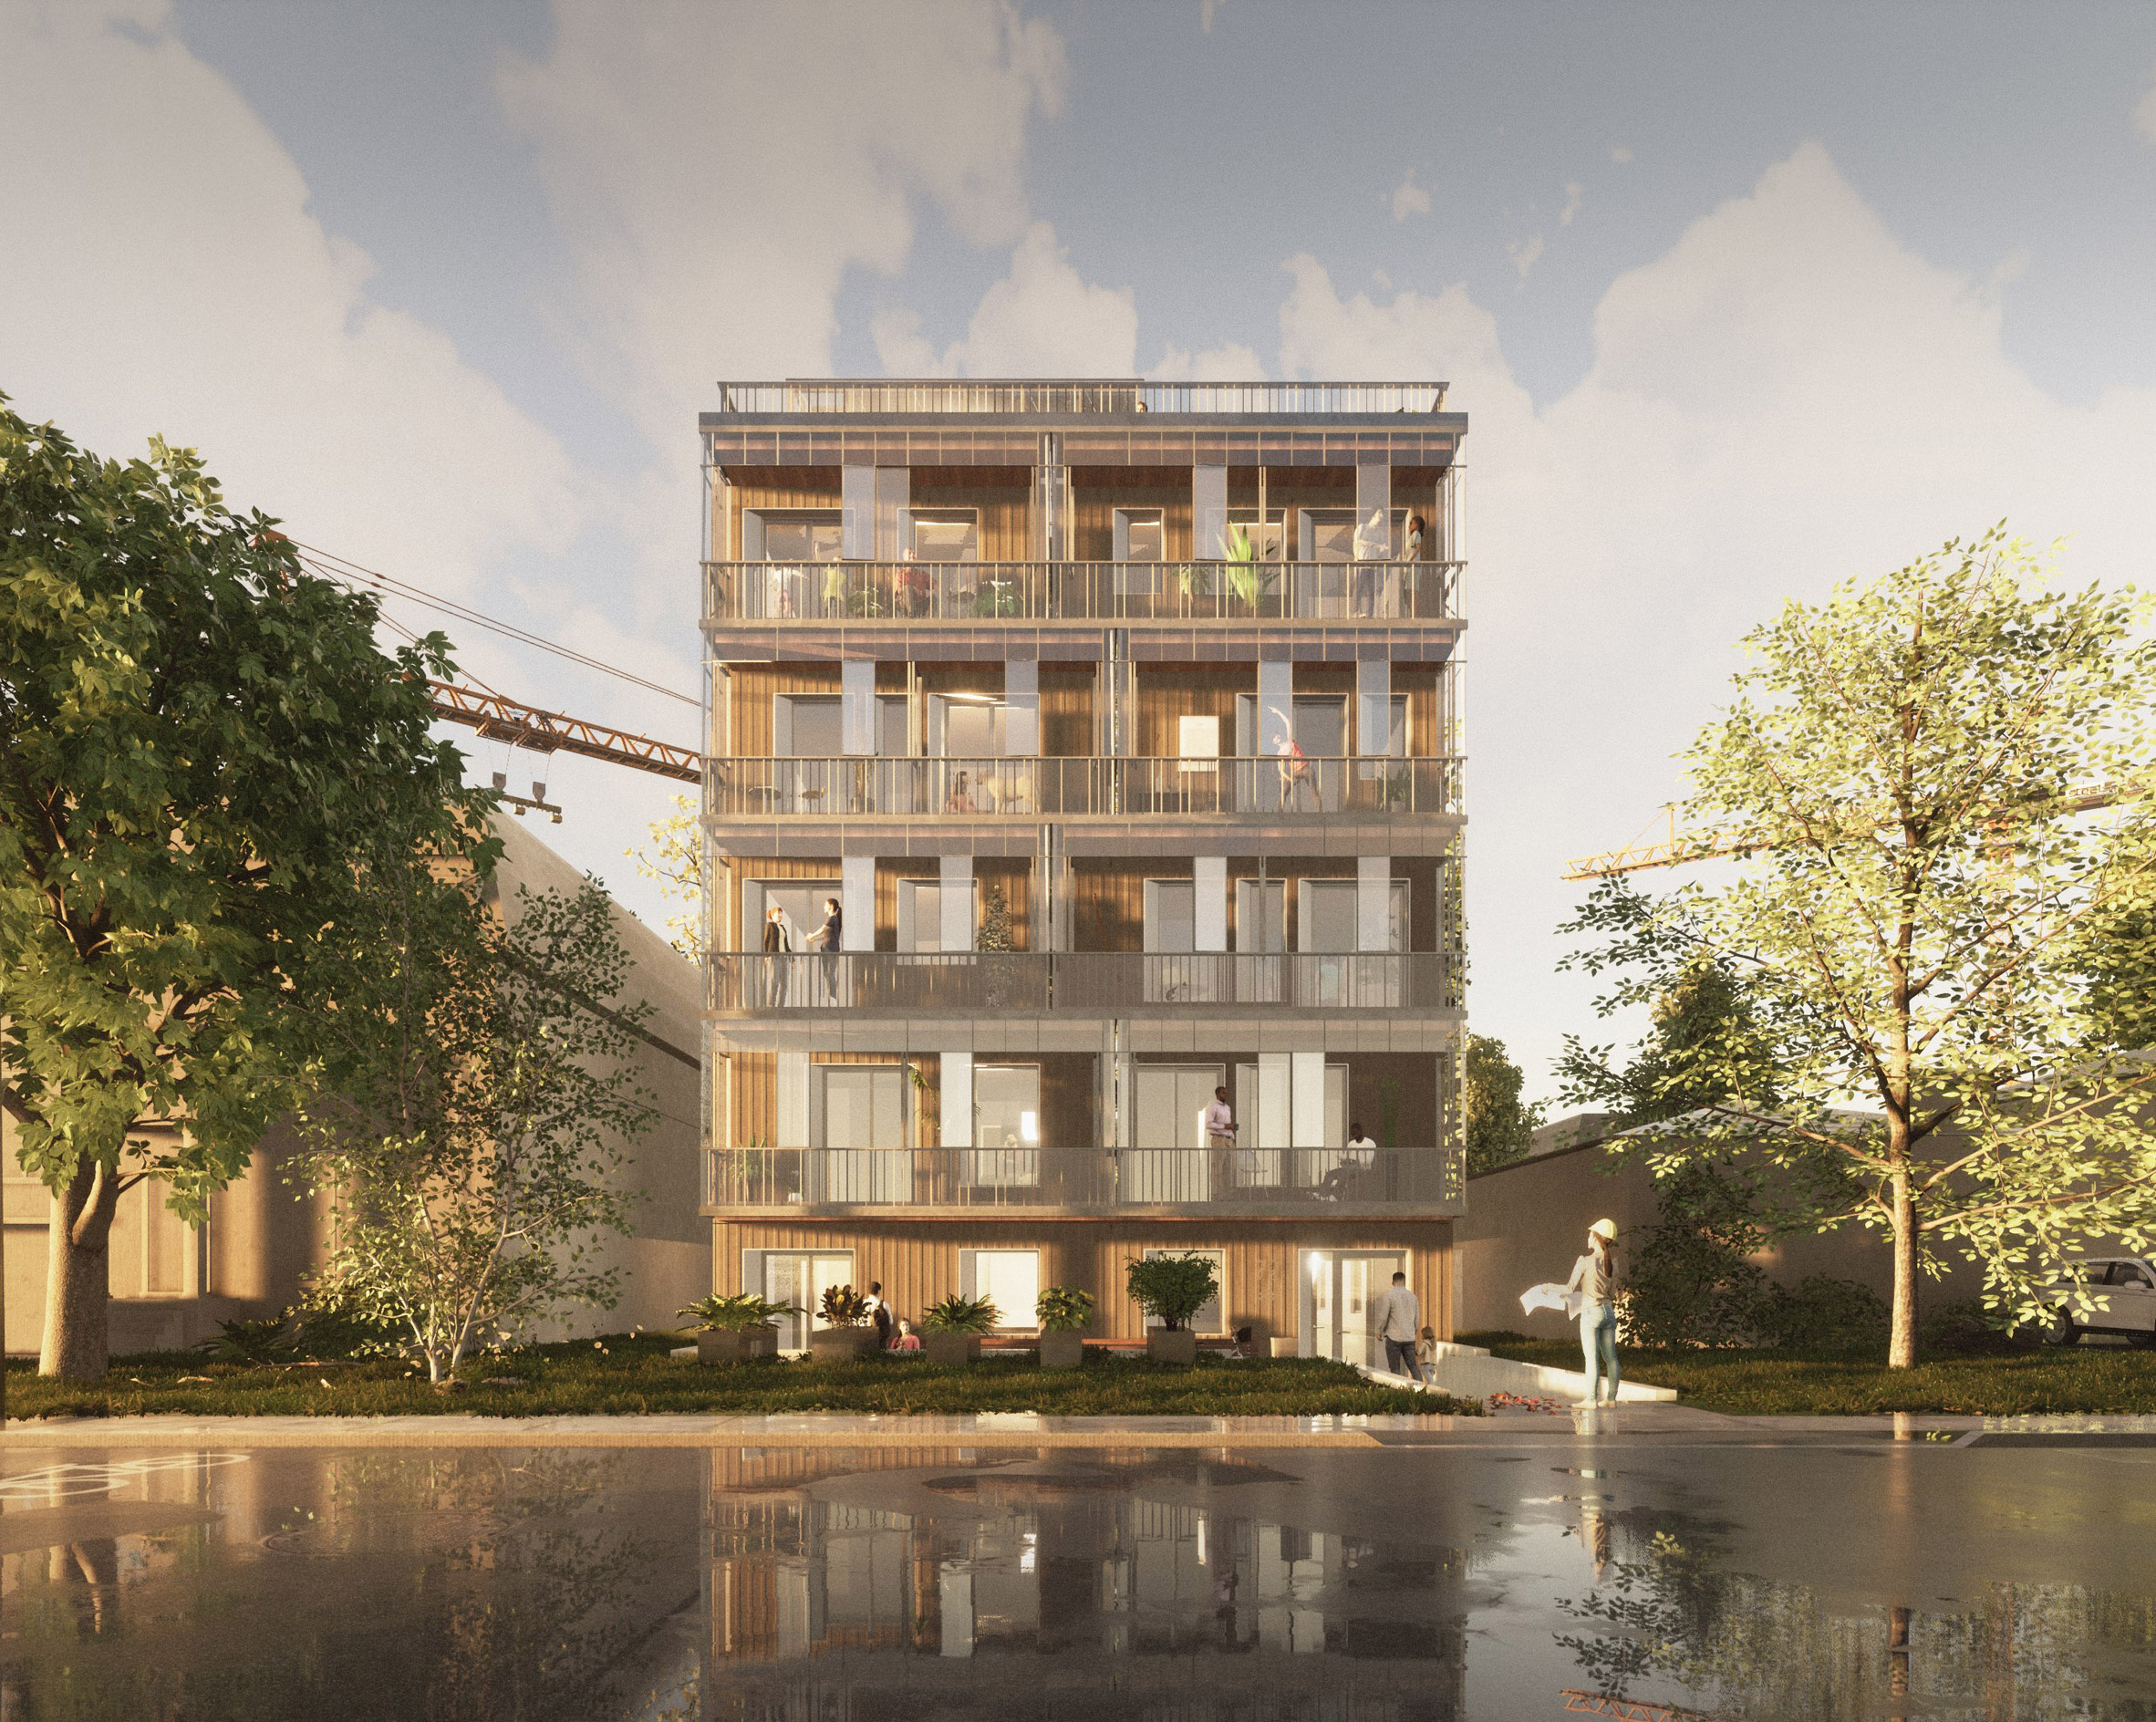 Architectural render of a multi-storey building on a riverside